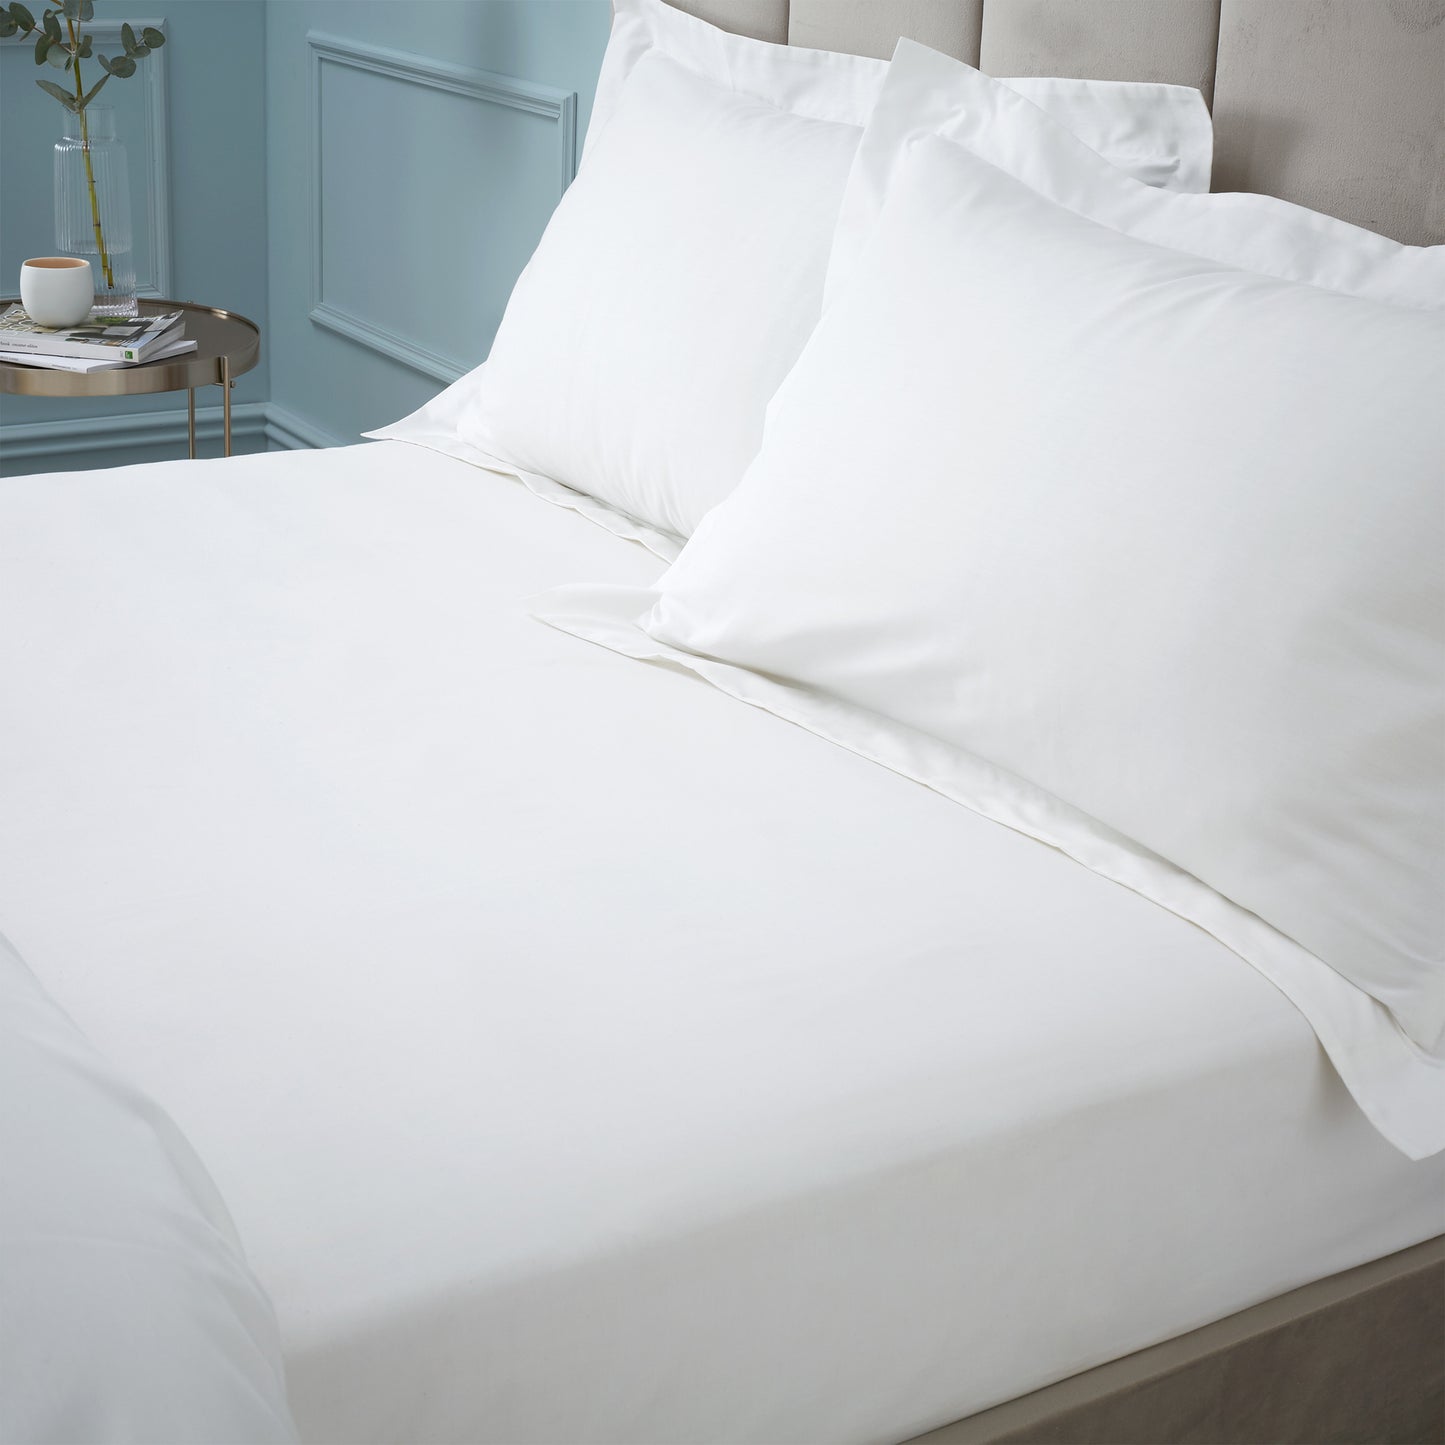 Bianca White 180 Thread Count Egyptian 100% Cotton Deep (34cm) Fitted Sheet